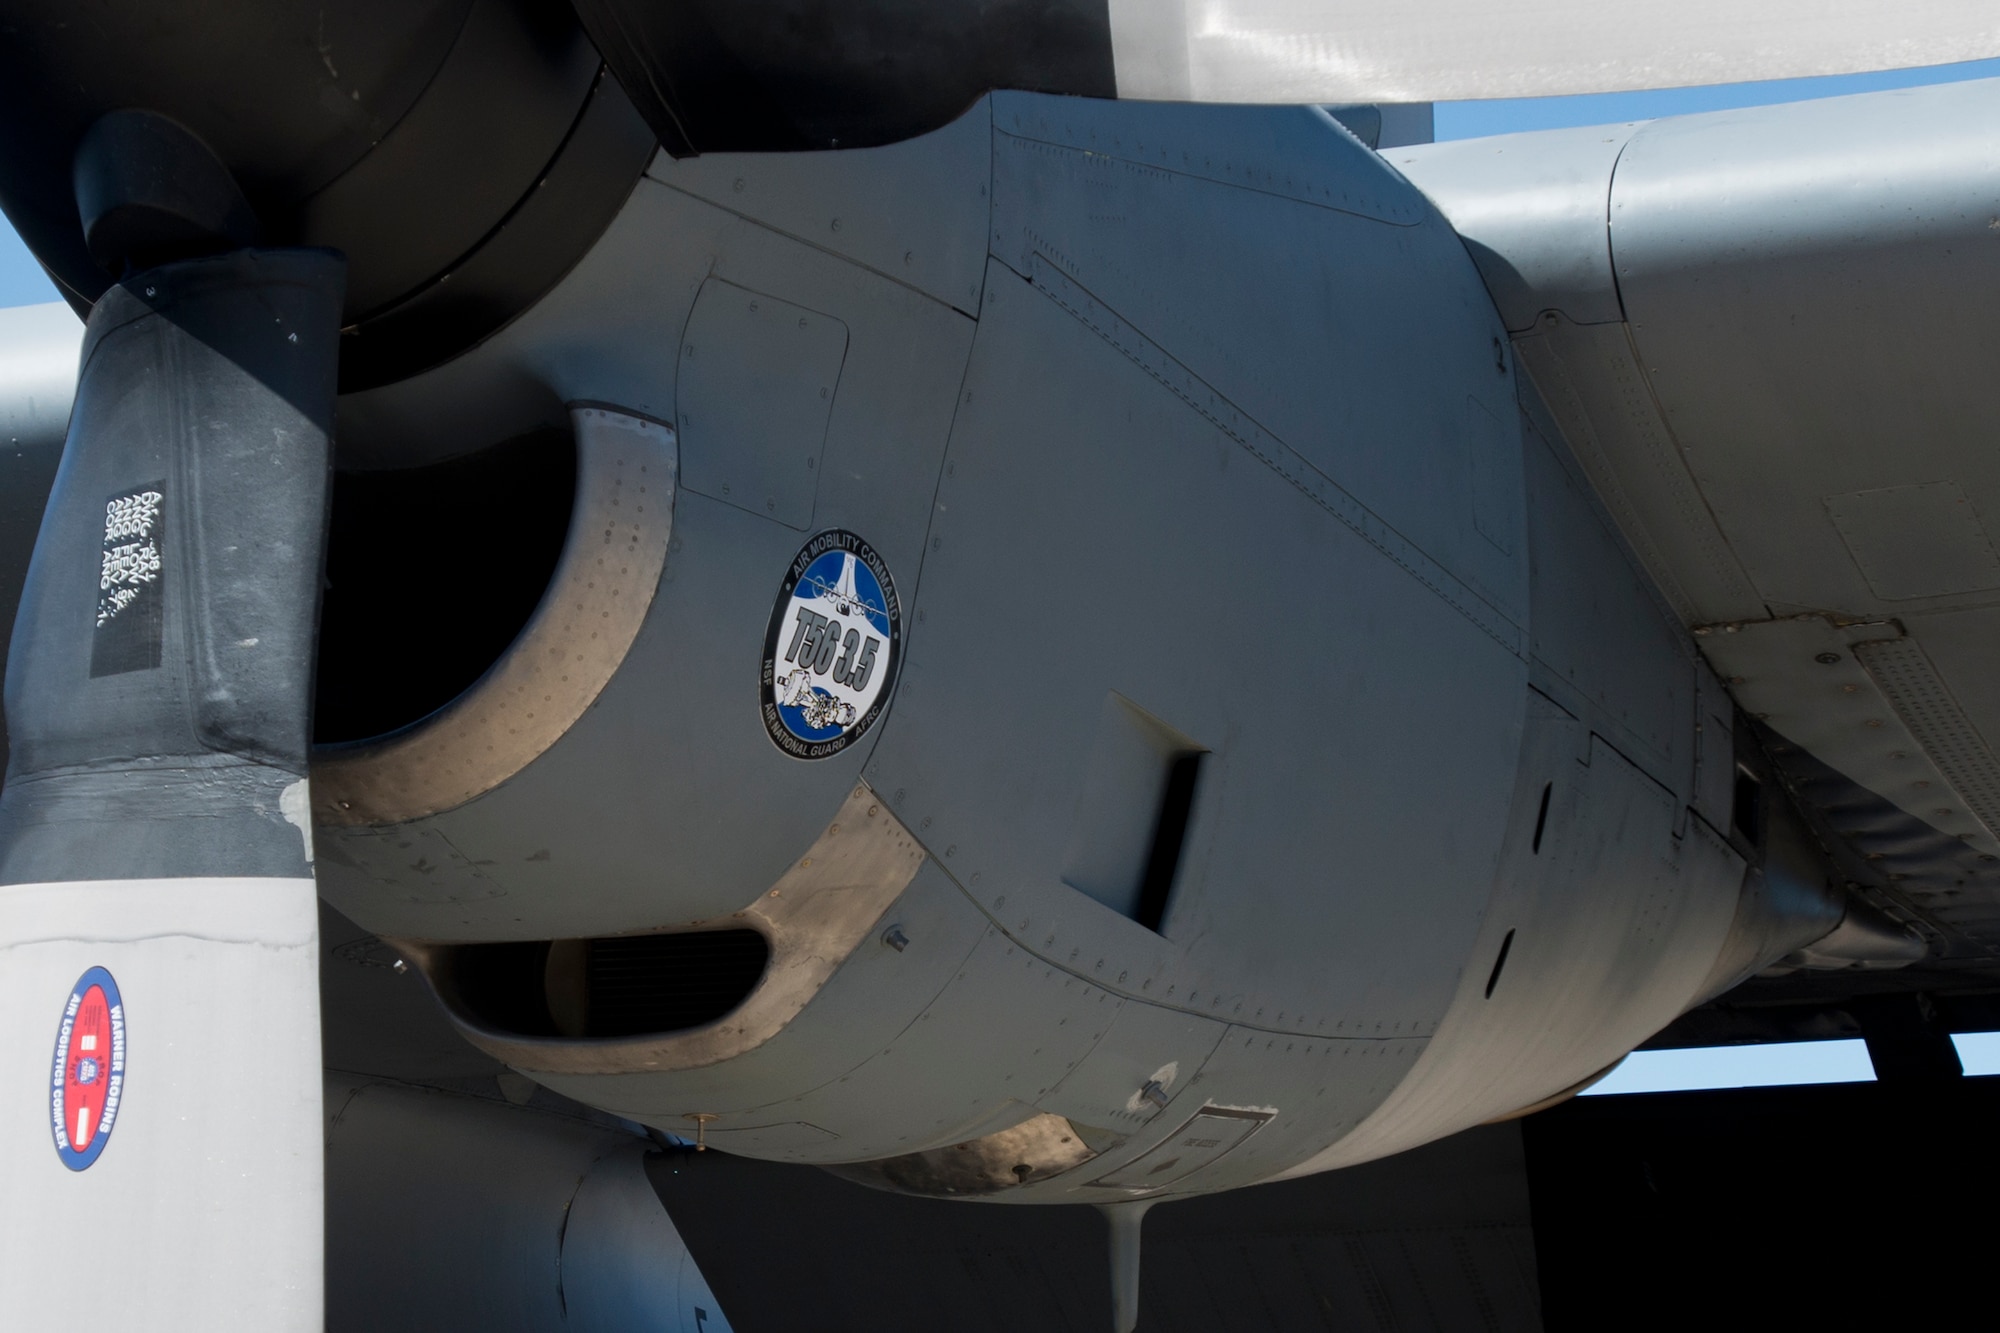 A Rolls-Royce T56 Series 3.5 engine is mounted on a Wyoming Air National Guard C-130H Hercules test aircraft at the Air National Guard Air Force Reserve Command Test Center at Tucson, Arizona, October 20, 2016. The test center is evaluating using the Series 3.5 engines across the Guard's legacy C-130H fleet. (U.S. Air National Guard photo by Staff Sgt. John E. Hillier)